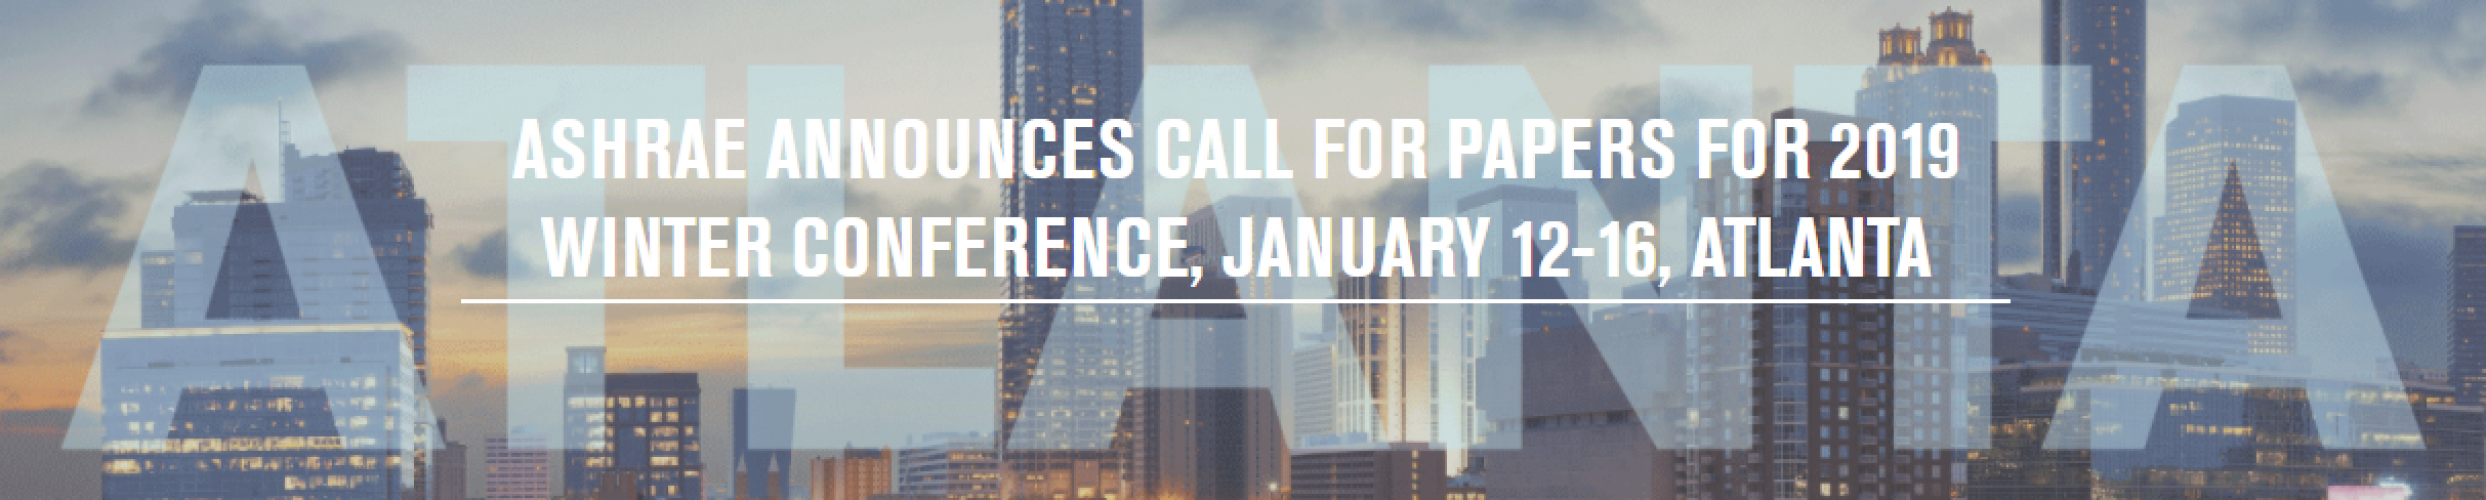 ASHRAE Announces Call for Papers for 2019 Winter Conference, January 12-16, Atlanta